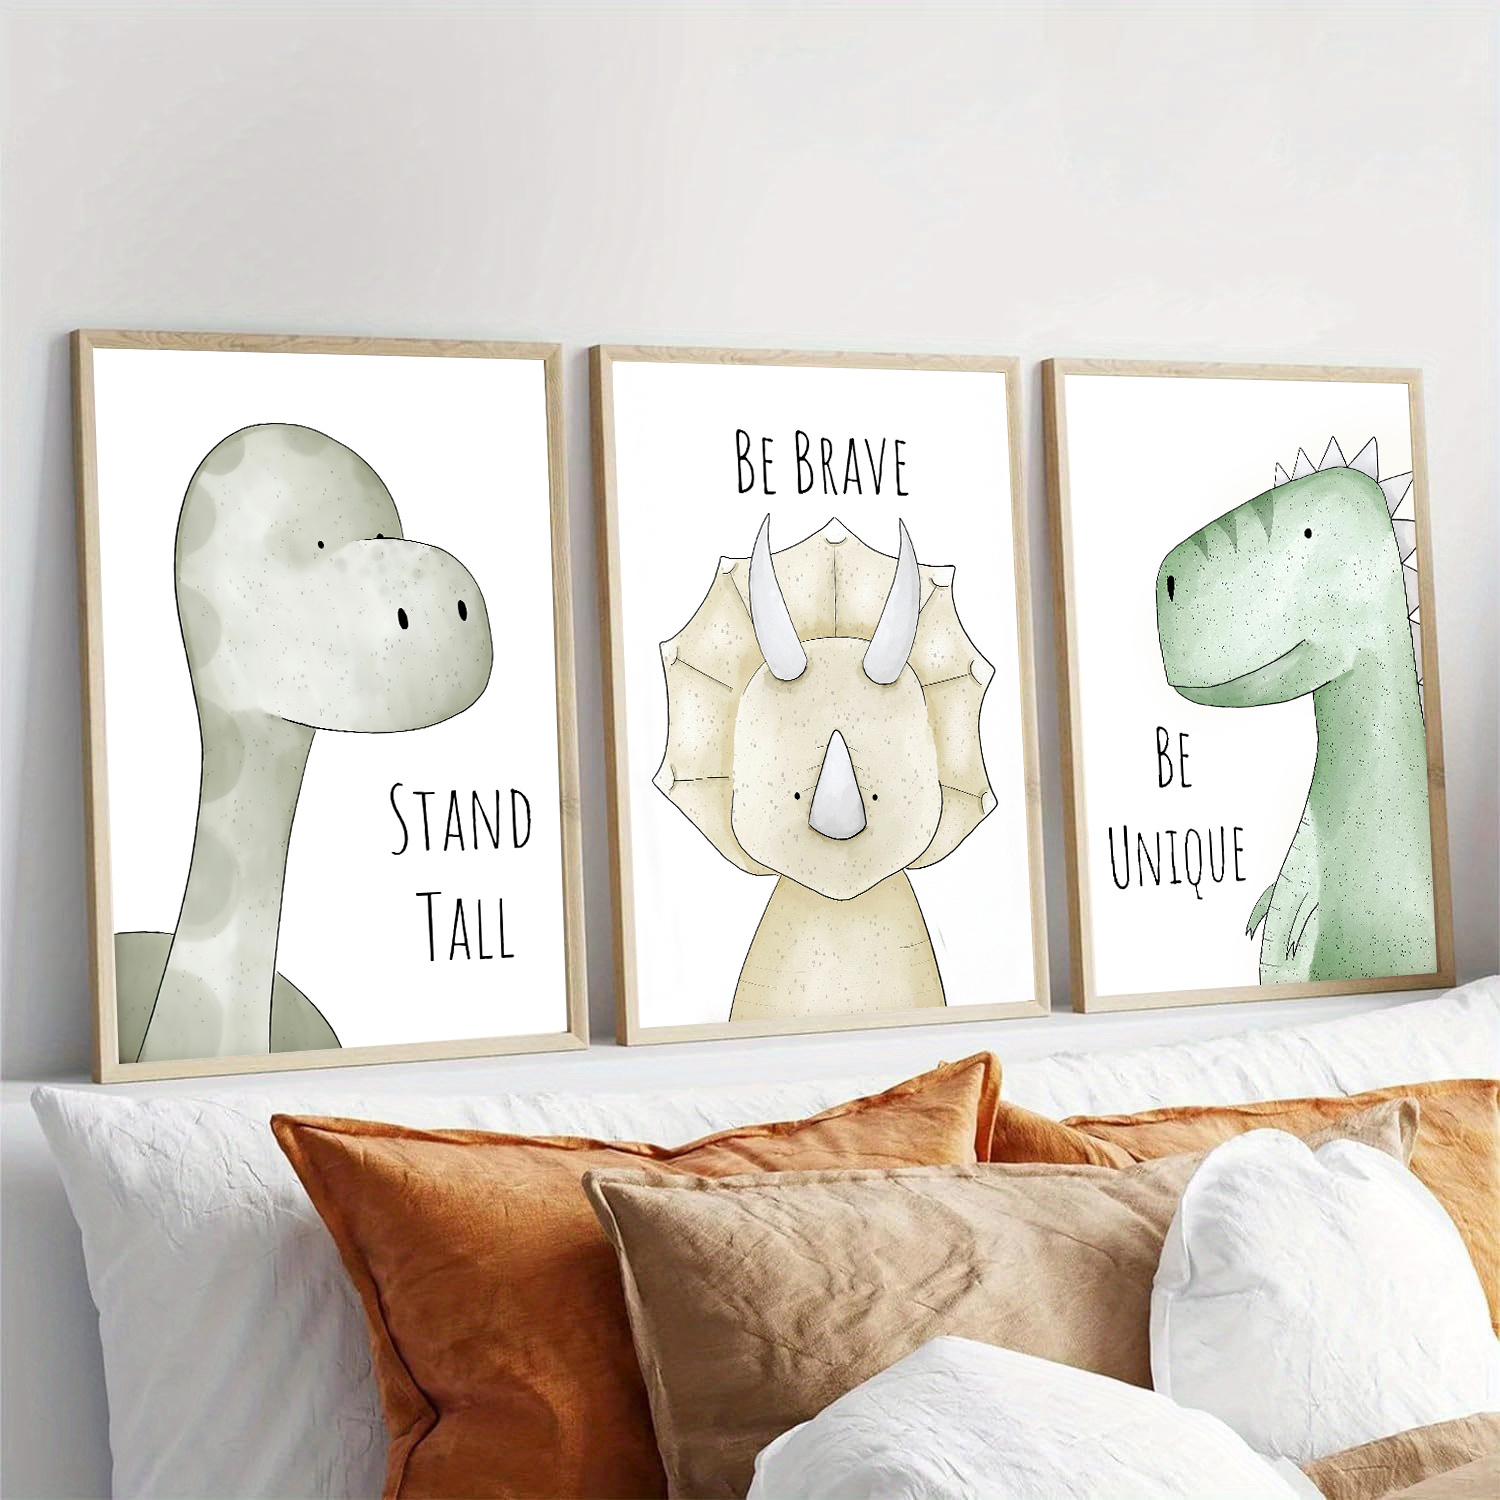 

3pcs/set Abstract Dinosaur Posters Wall Art, Motivation Statement Stand Tall Be Brave Be Unique, For Boys Room Living Room Bedroom Chrismas Decor, Unframed